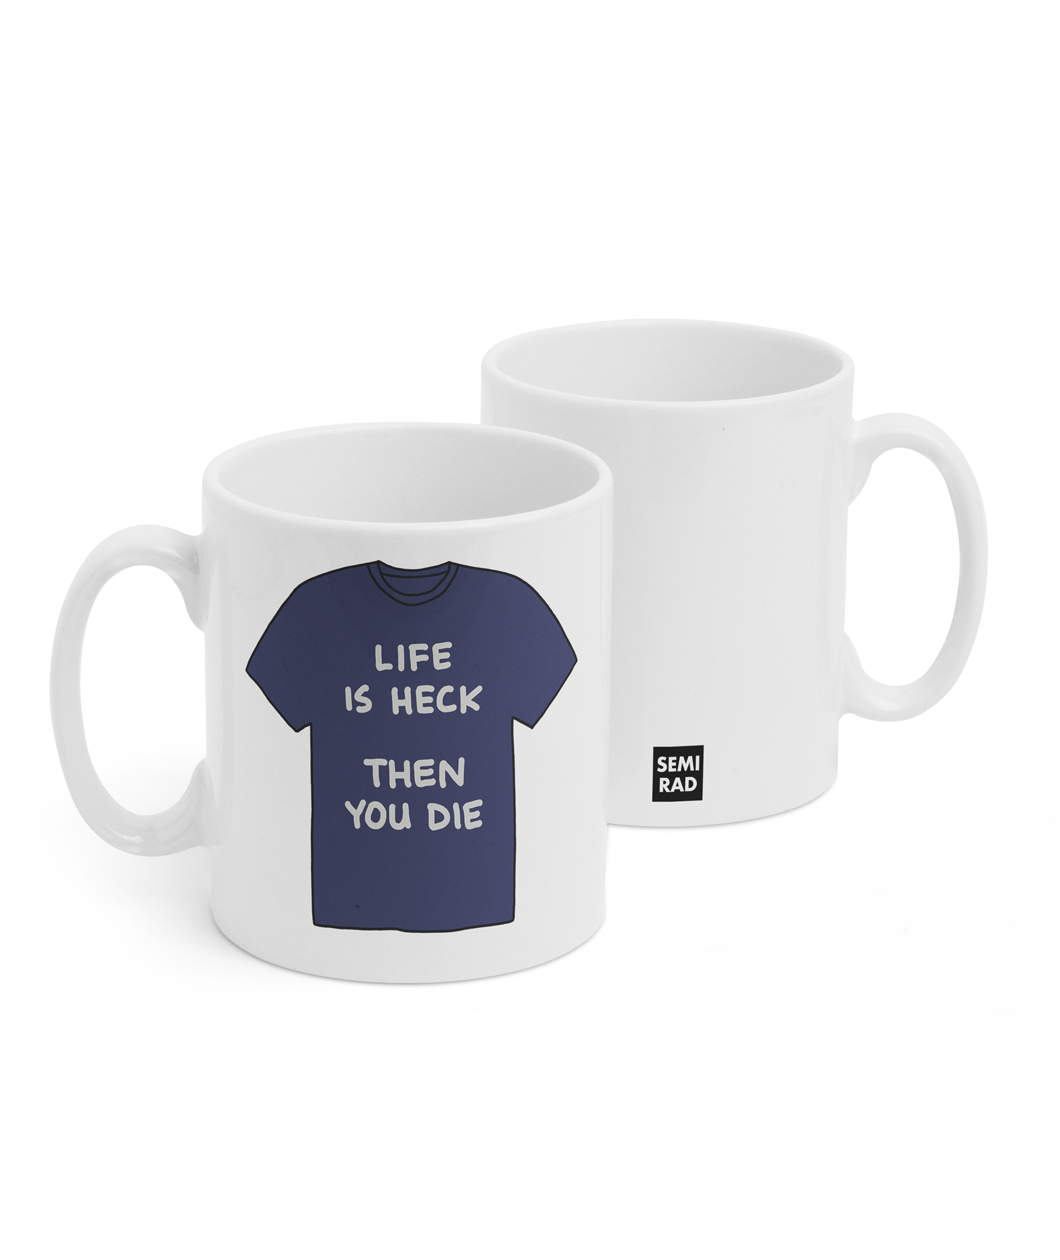 Two white mugs sitting next to each other showing two sides of the same mug. The front side has a drawing of a dark blue t-shirt with the text 